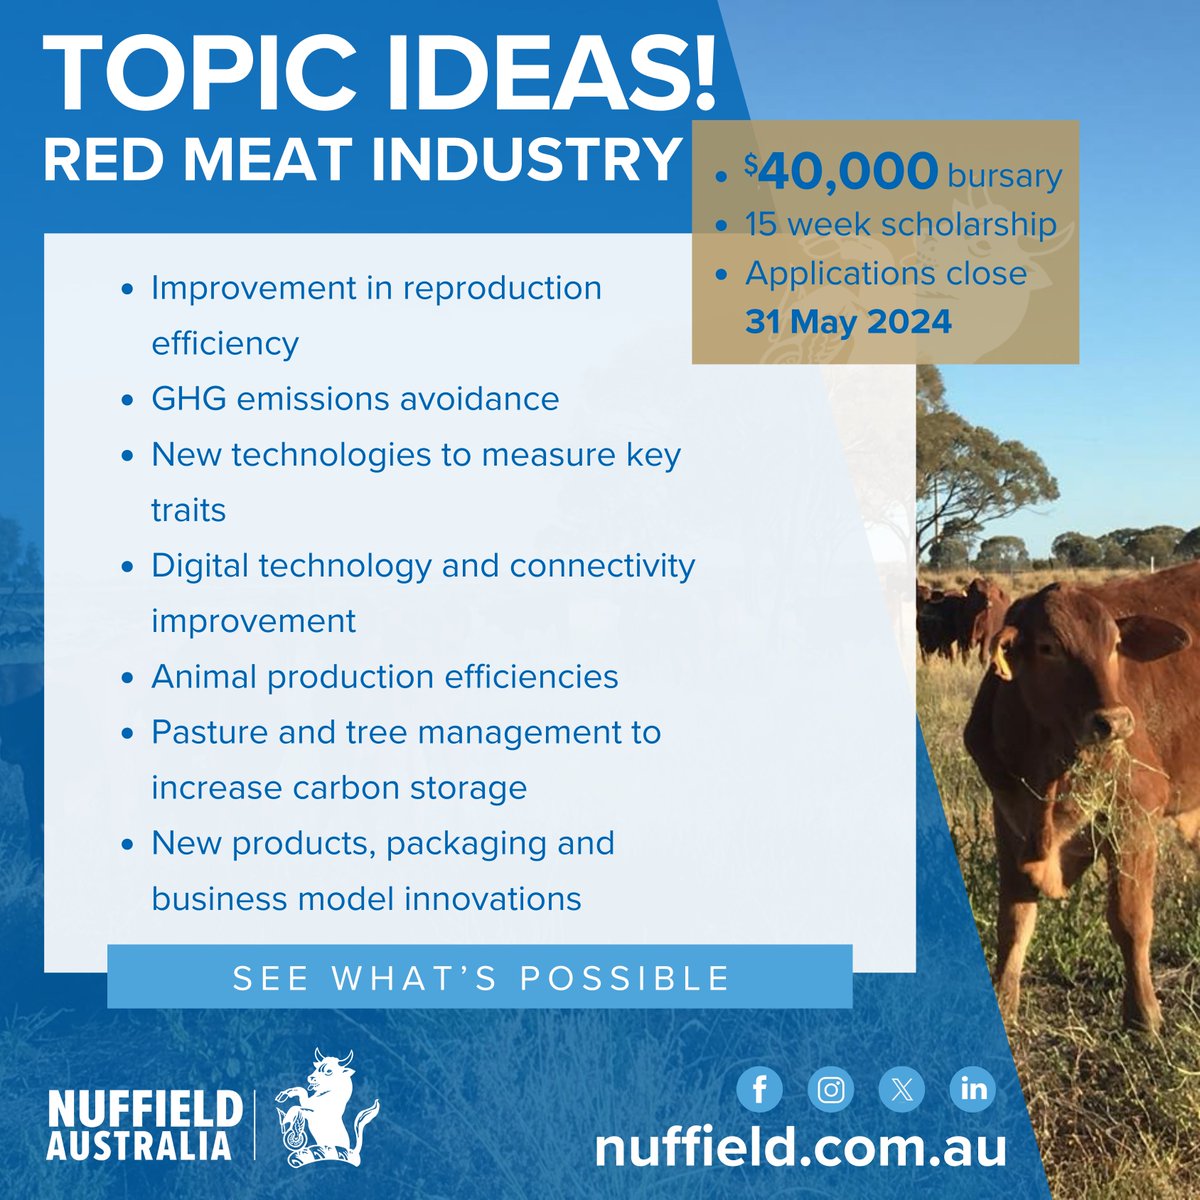 ARE YOU involved in the #redmeat or #NorthernPastoral Industry in Australia? If so you apply for a 2025 Nuffield Scholarship generously supported by @meatlivestock & @AustAgCo @EldersLimited @ConPastCo andS.Kidman & Co nuffield.com.au #applynow #Aussiebeef #FNQ #BEEF